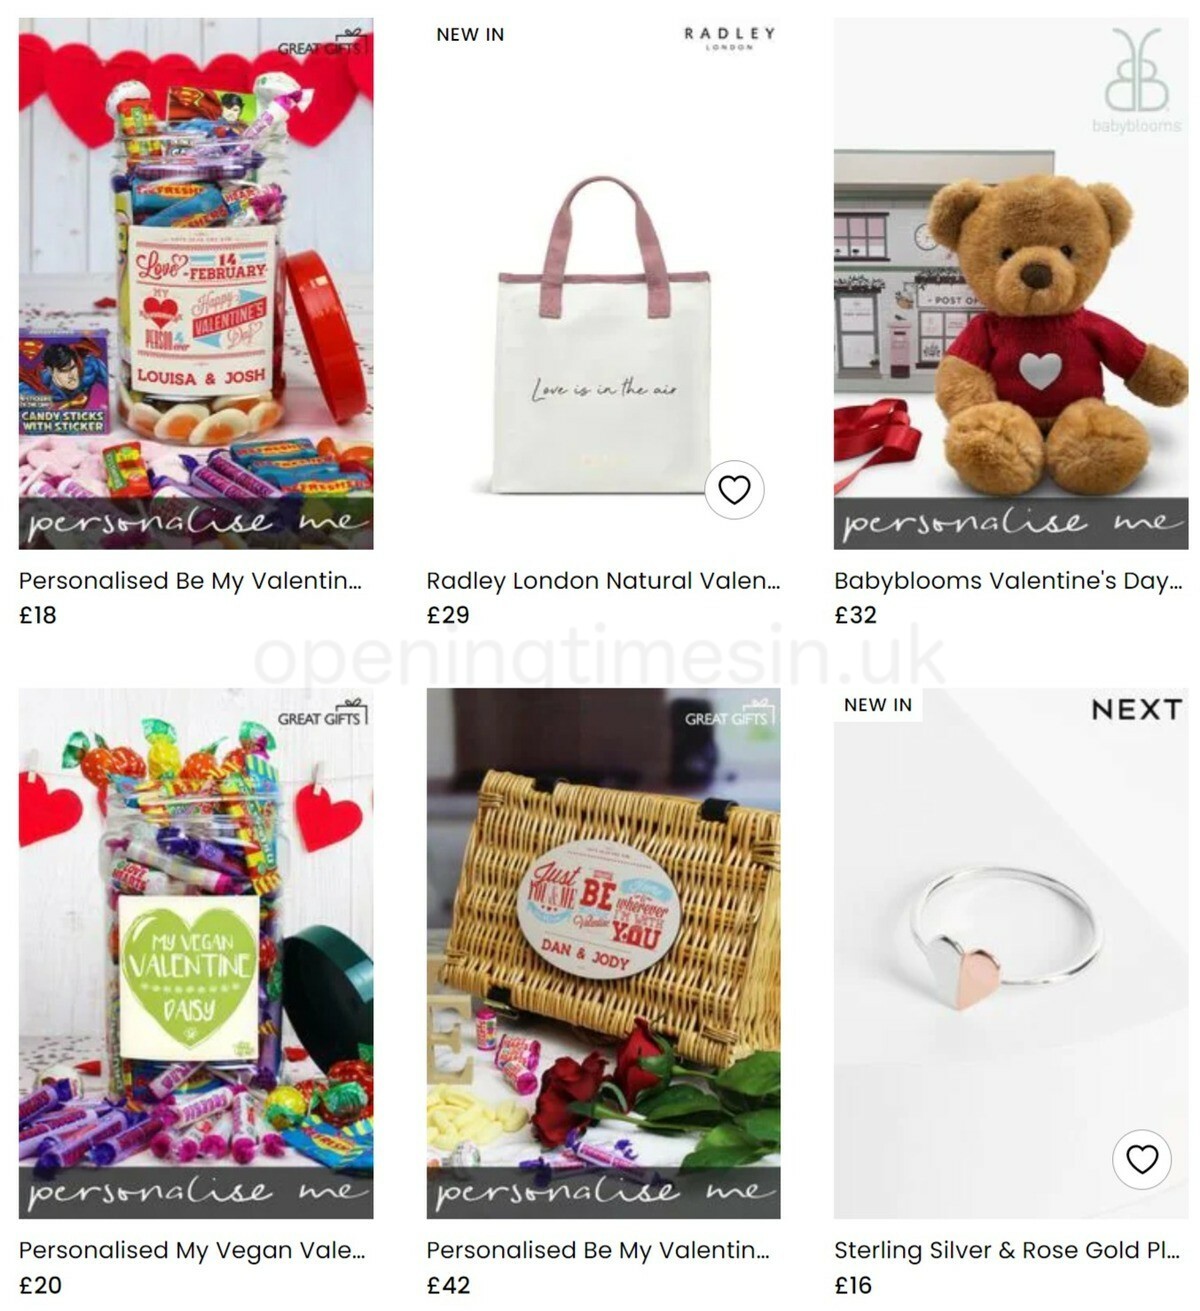 Next Valentine's Day Offers from 24 January